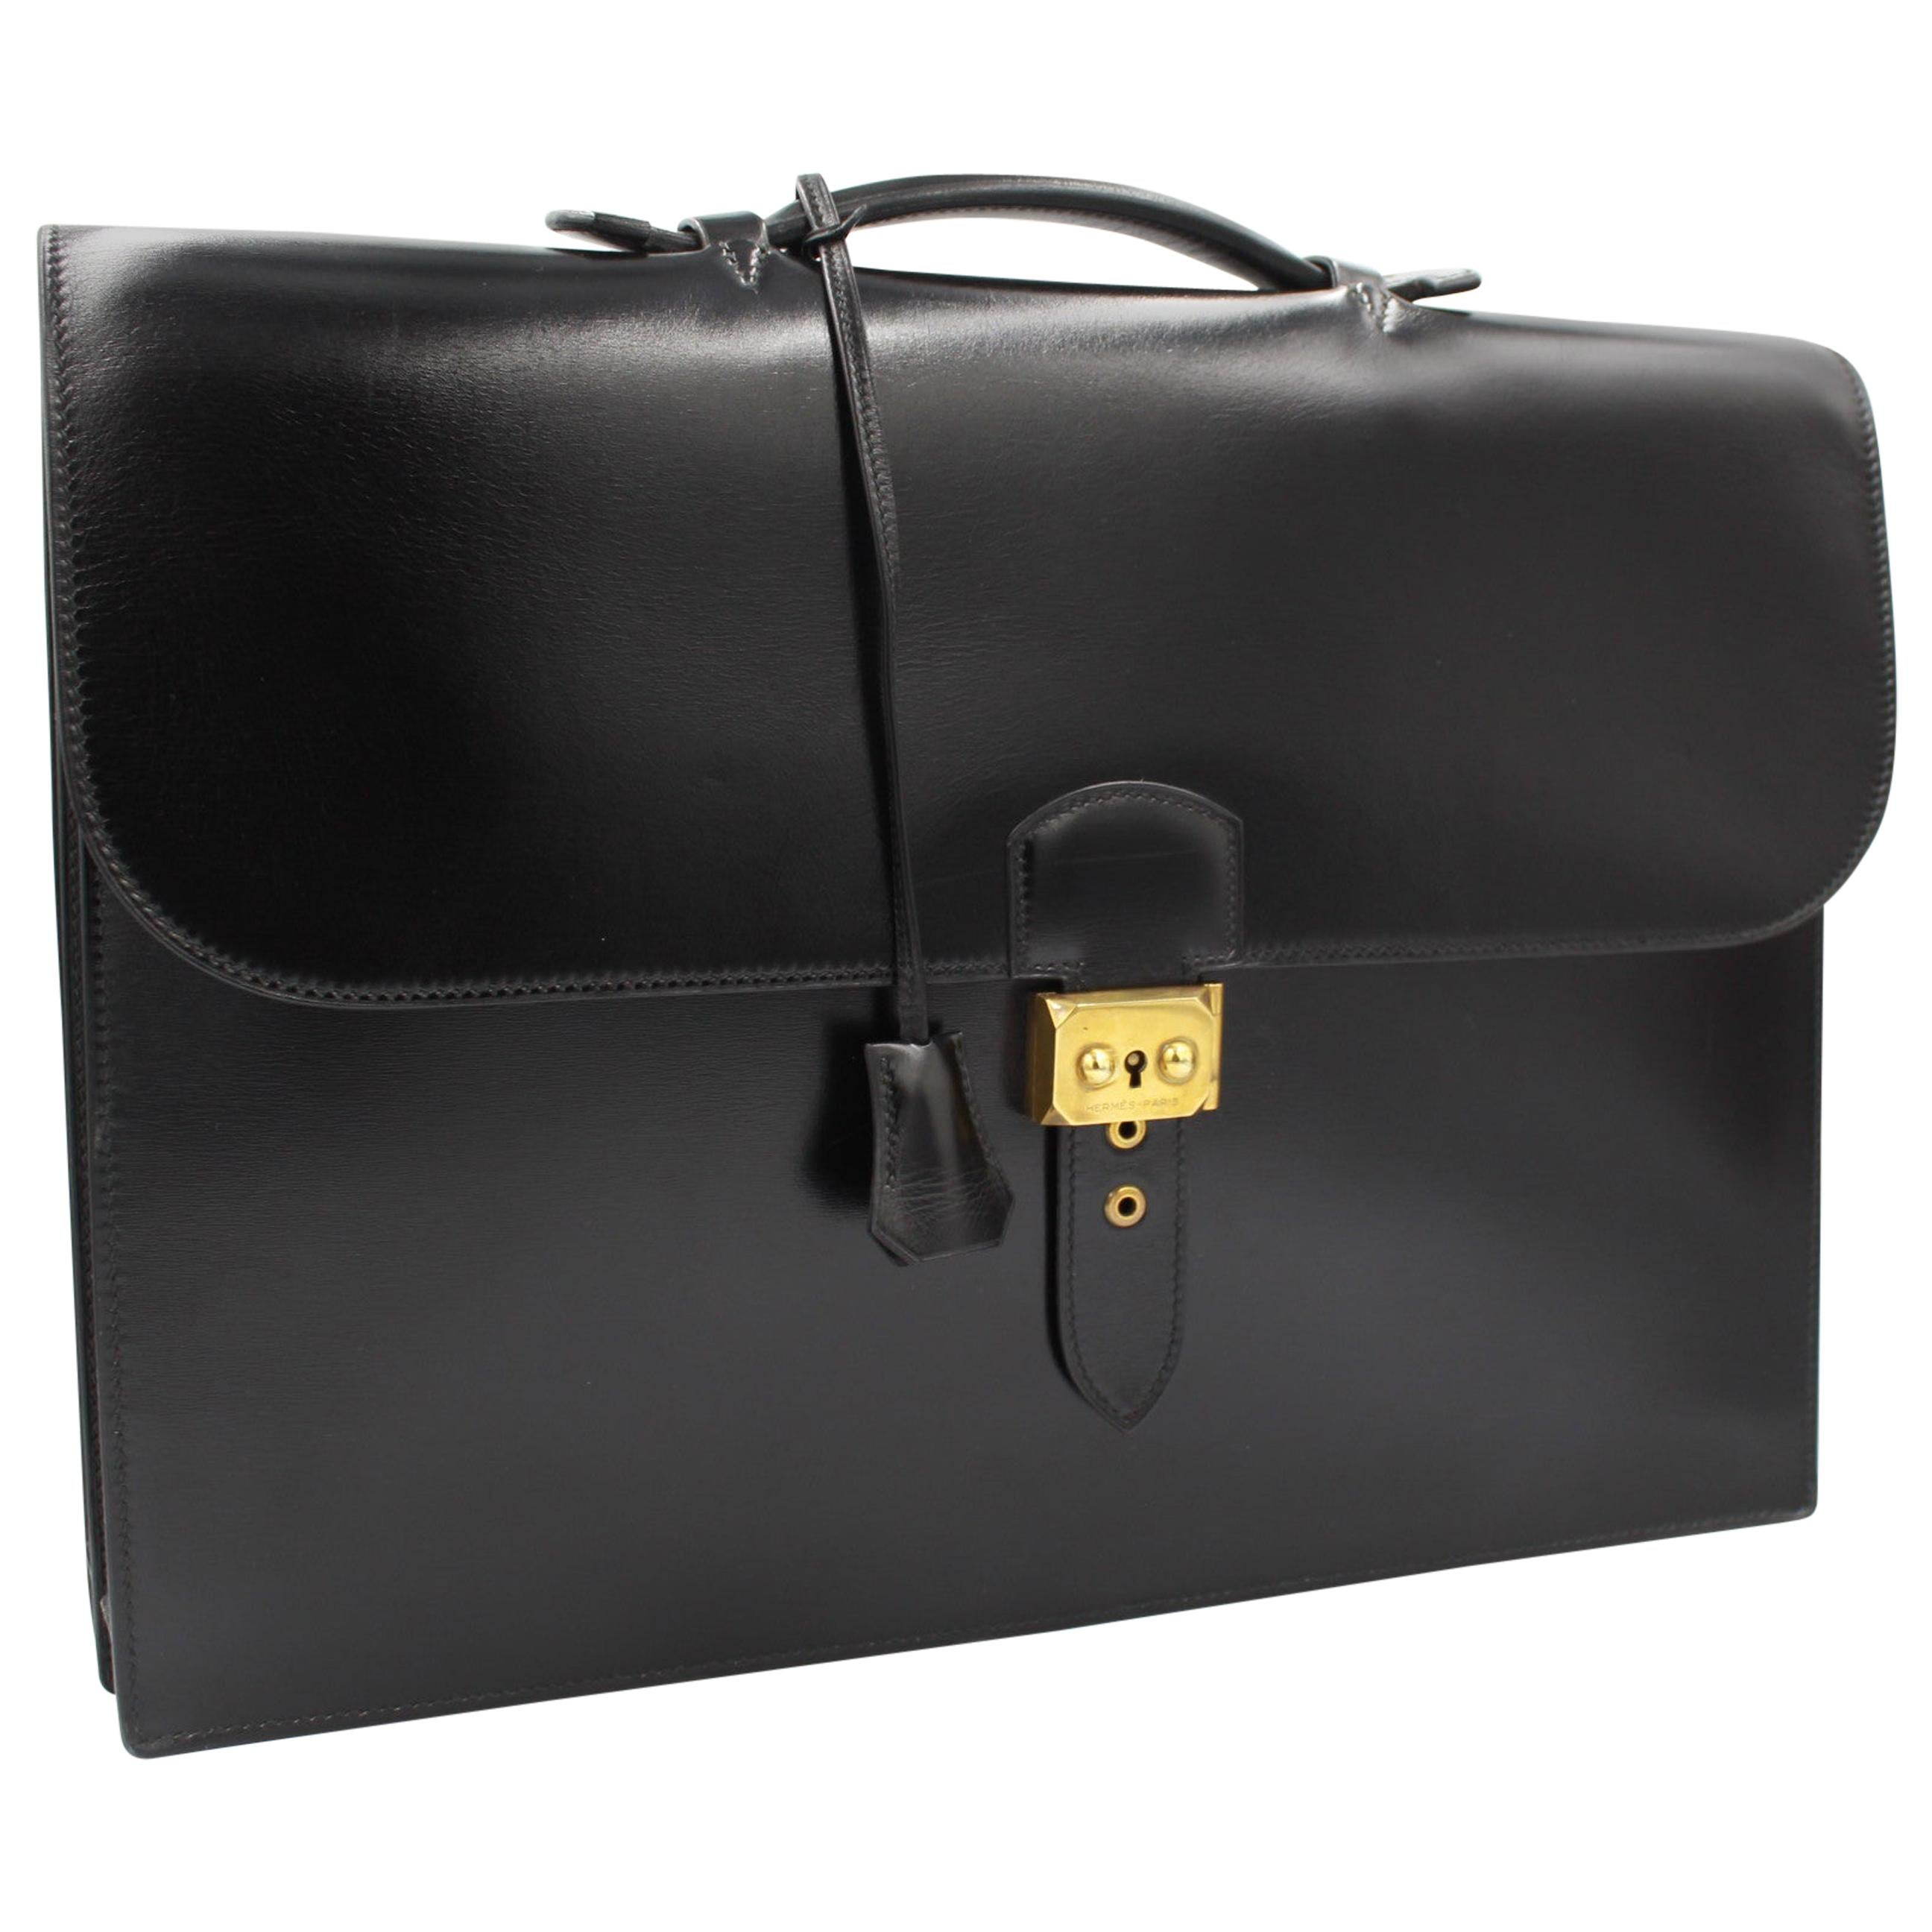 Hermes Sac a Depeches Briefcase Bag in black box Leather